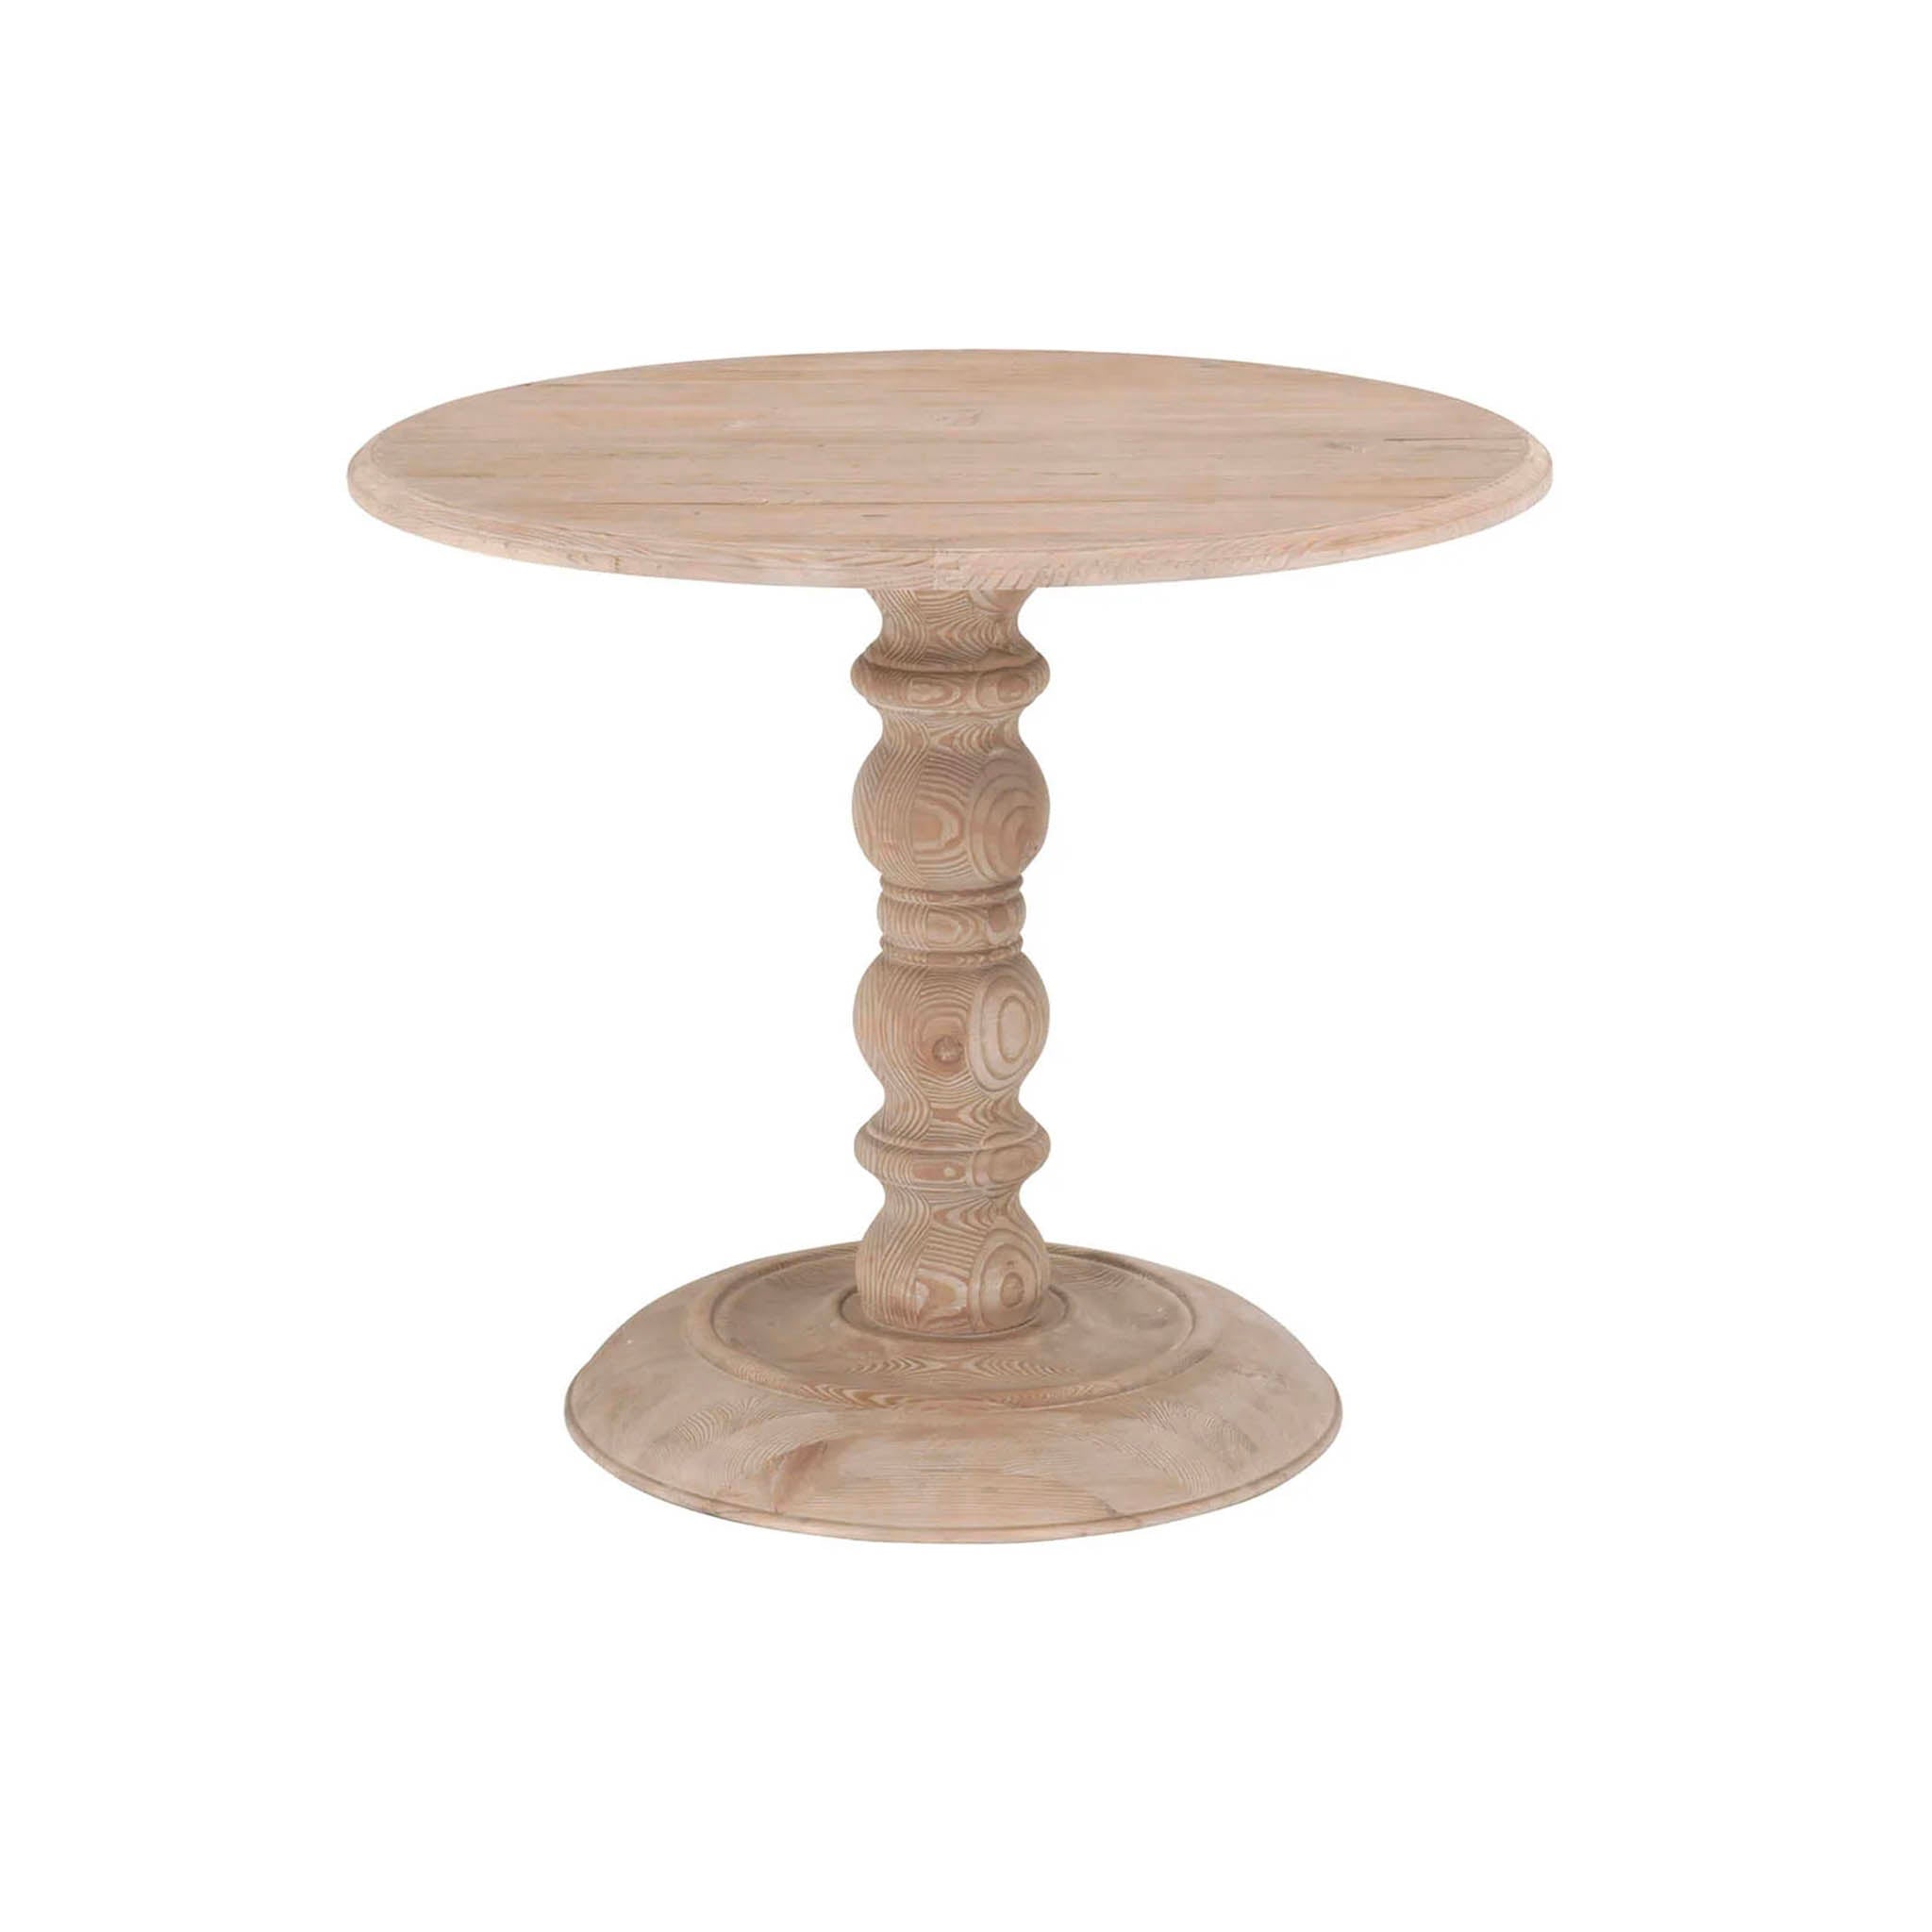 Ashby Round Dining Table